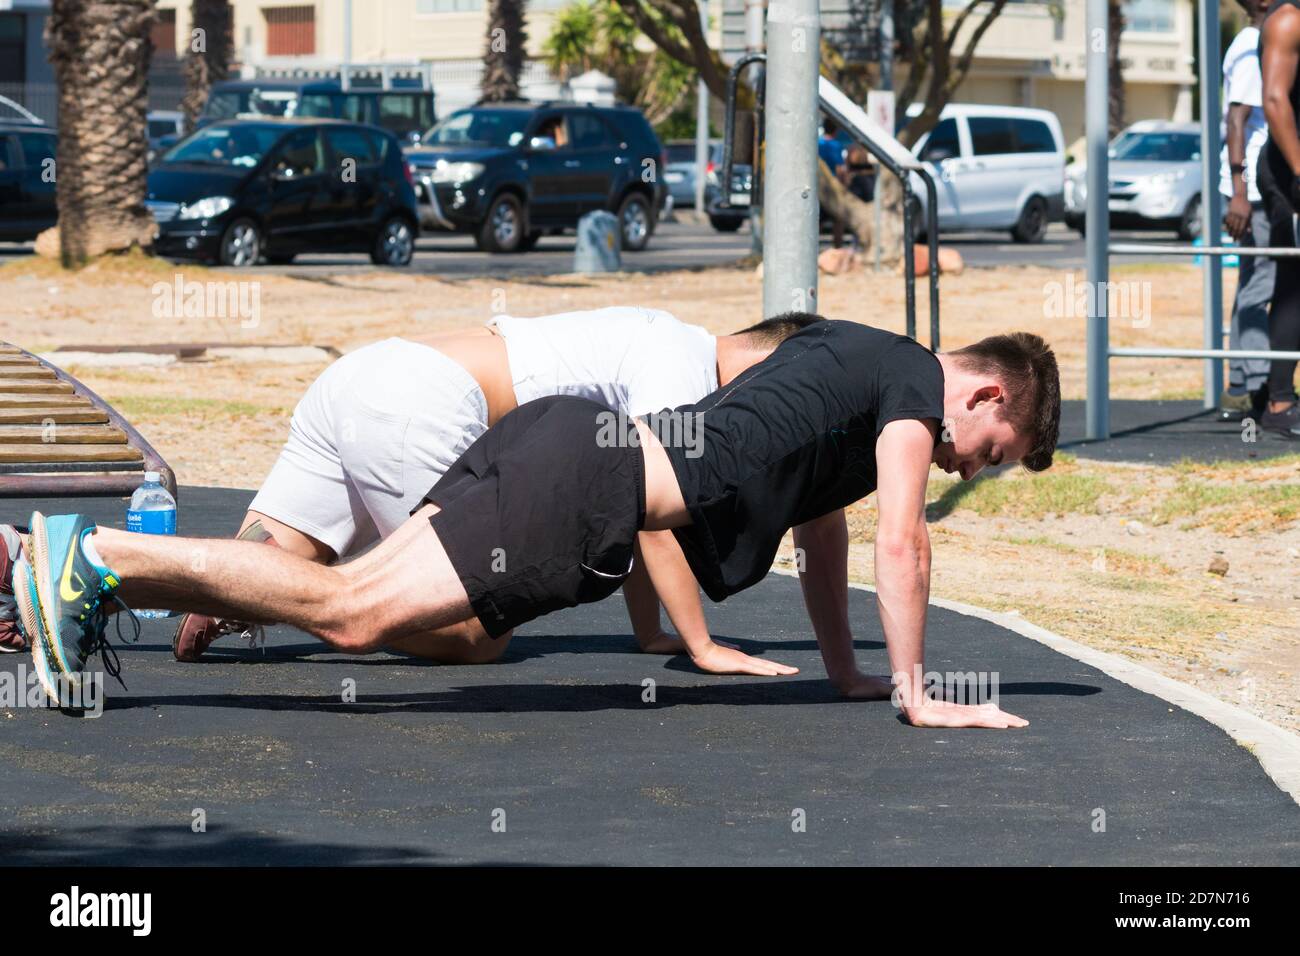 two young men doing pushups outdoors during an exercise or gym training session concept health and fitness lifestyle Stock Photo